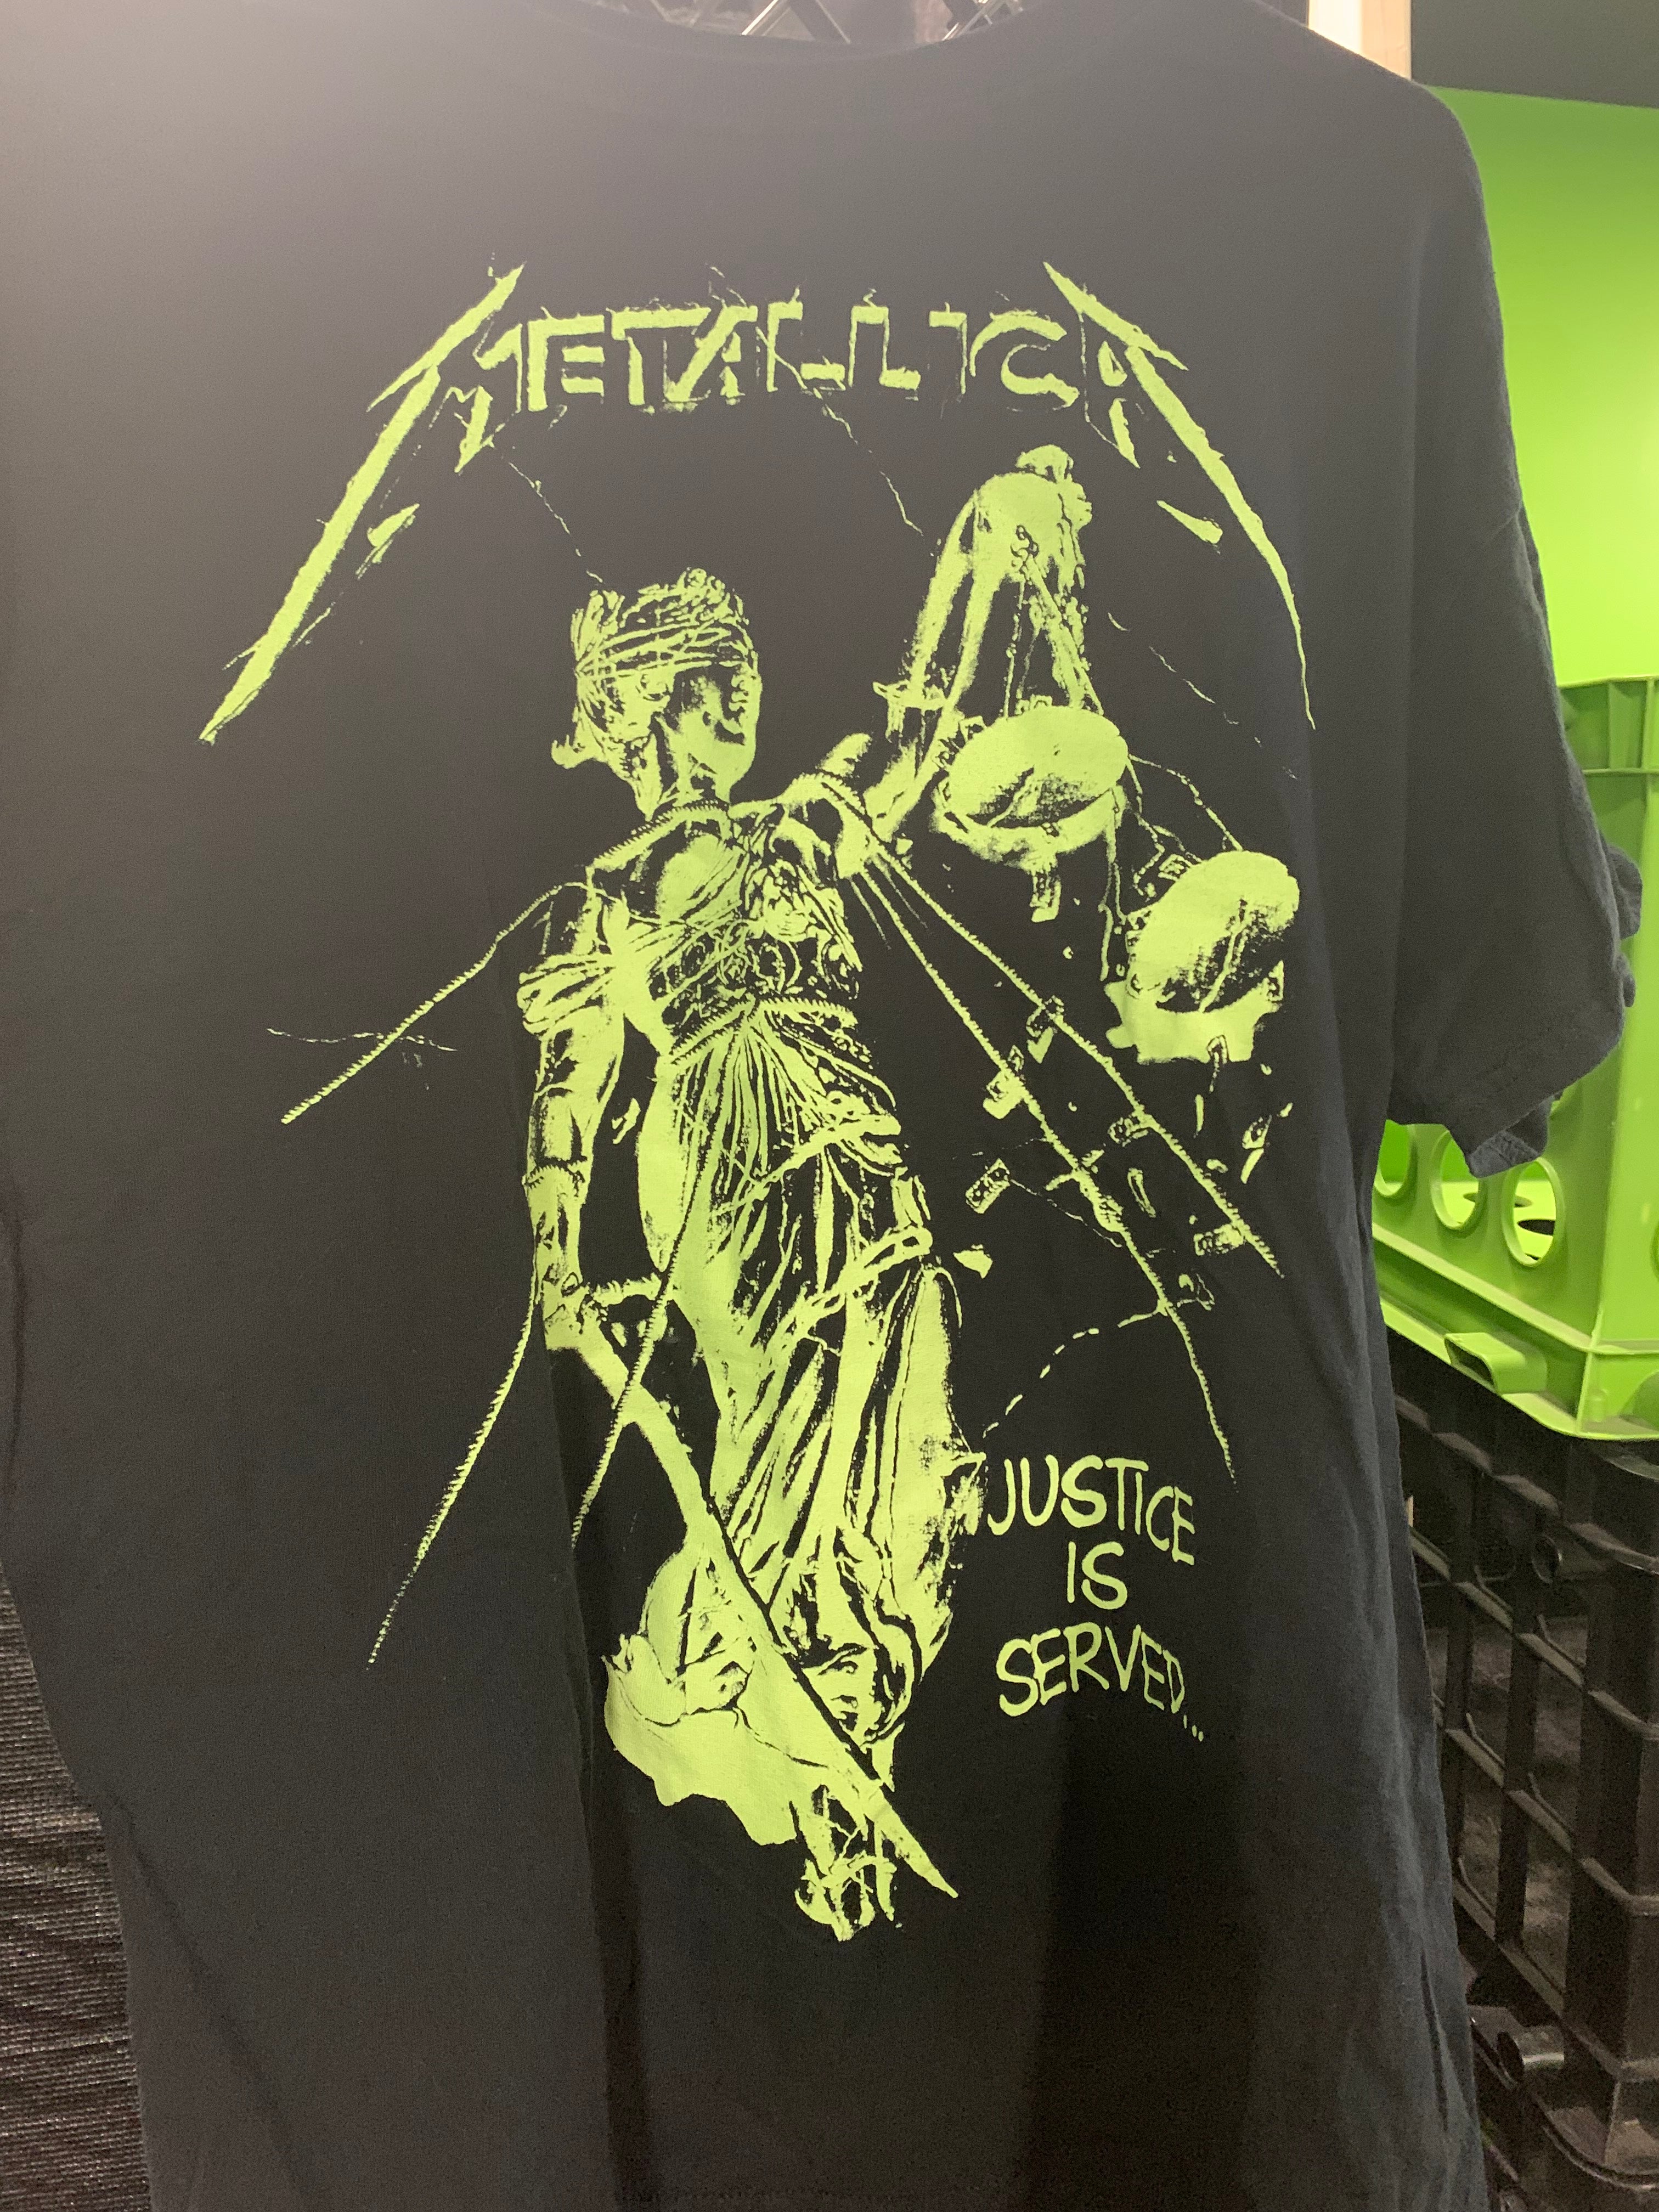 Metallica Blackened Friday 2018 Justice Is Served T-Shirt, Black, L